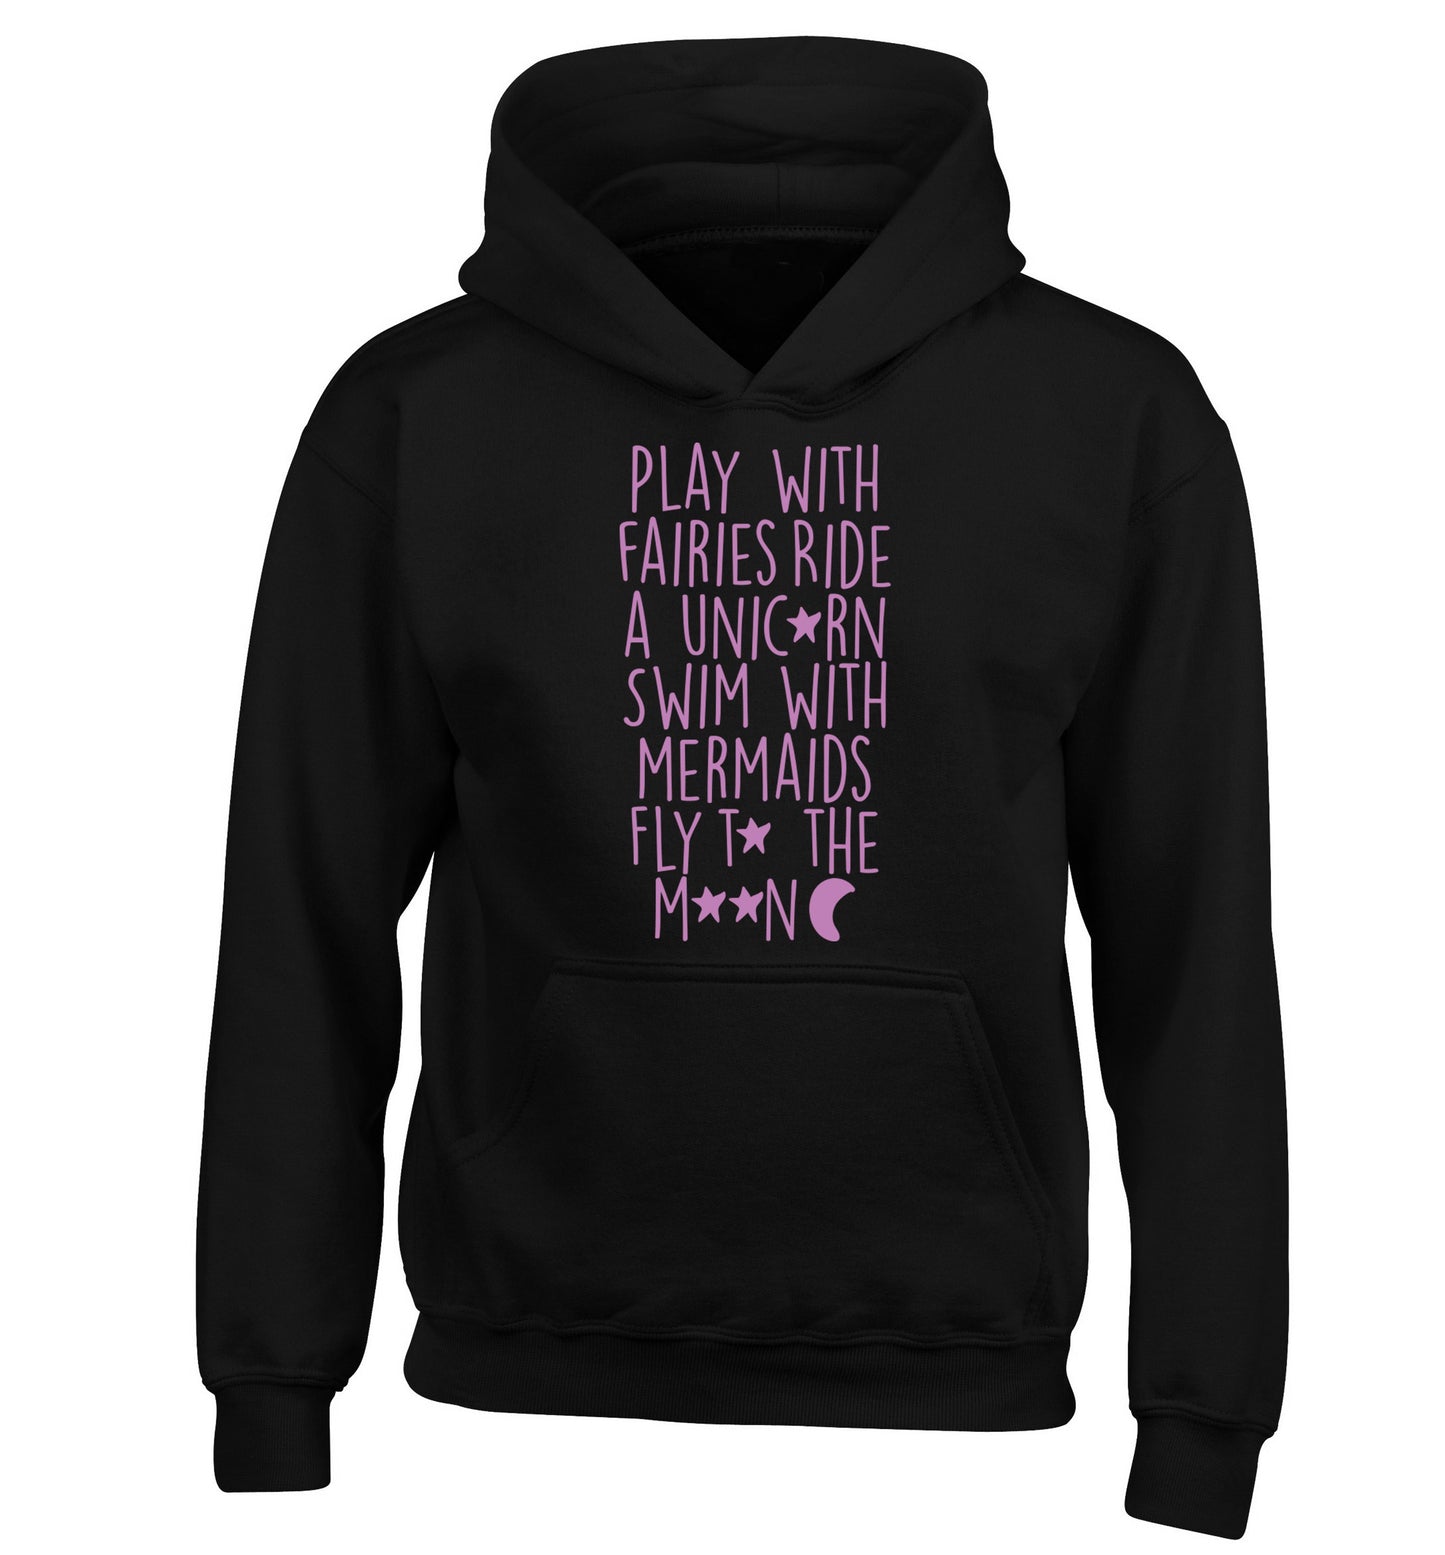 Play with fairies ride a unicorn swim with mermaids fly to the moon children's black hoodie 12-14 Years